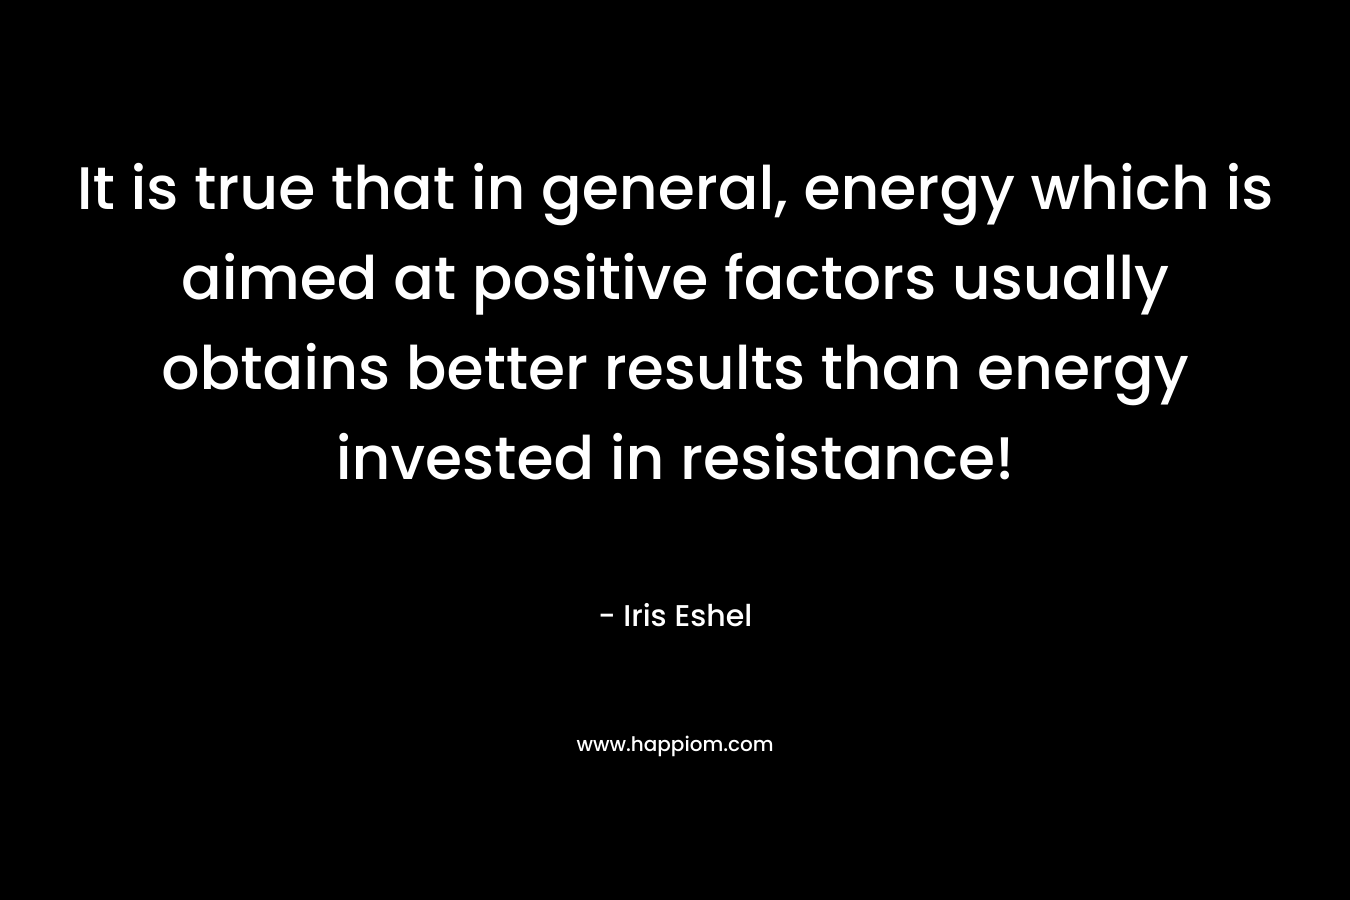 It is true that in general, energy which is aimed at positive factors usually obtains better results than energy invested in resistance! – Iris Eshel